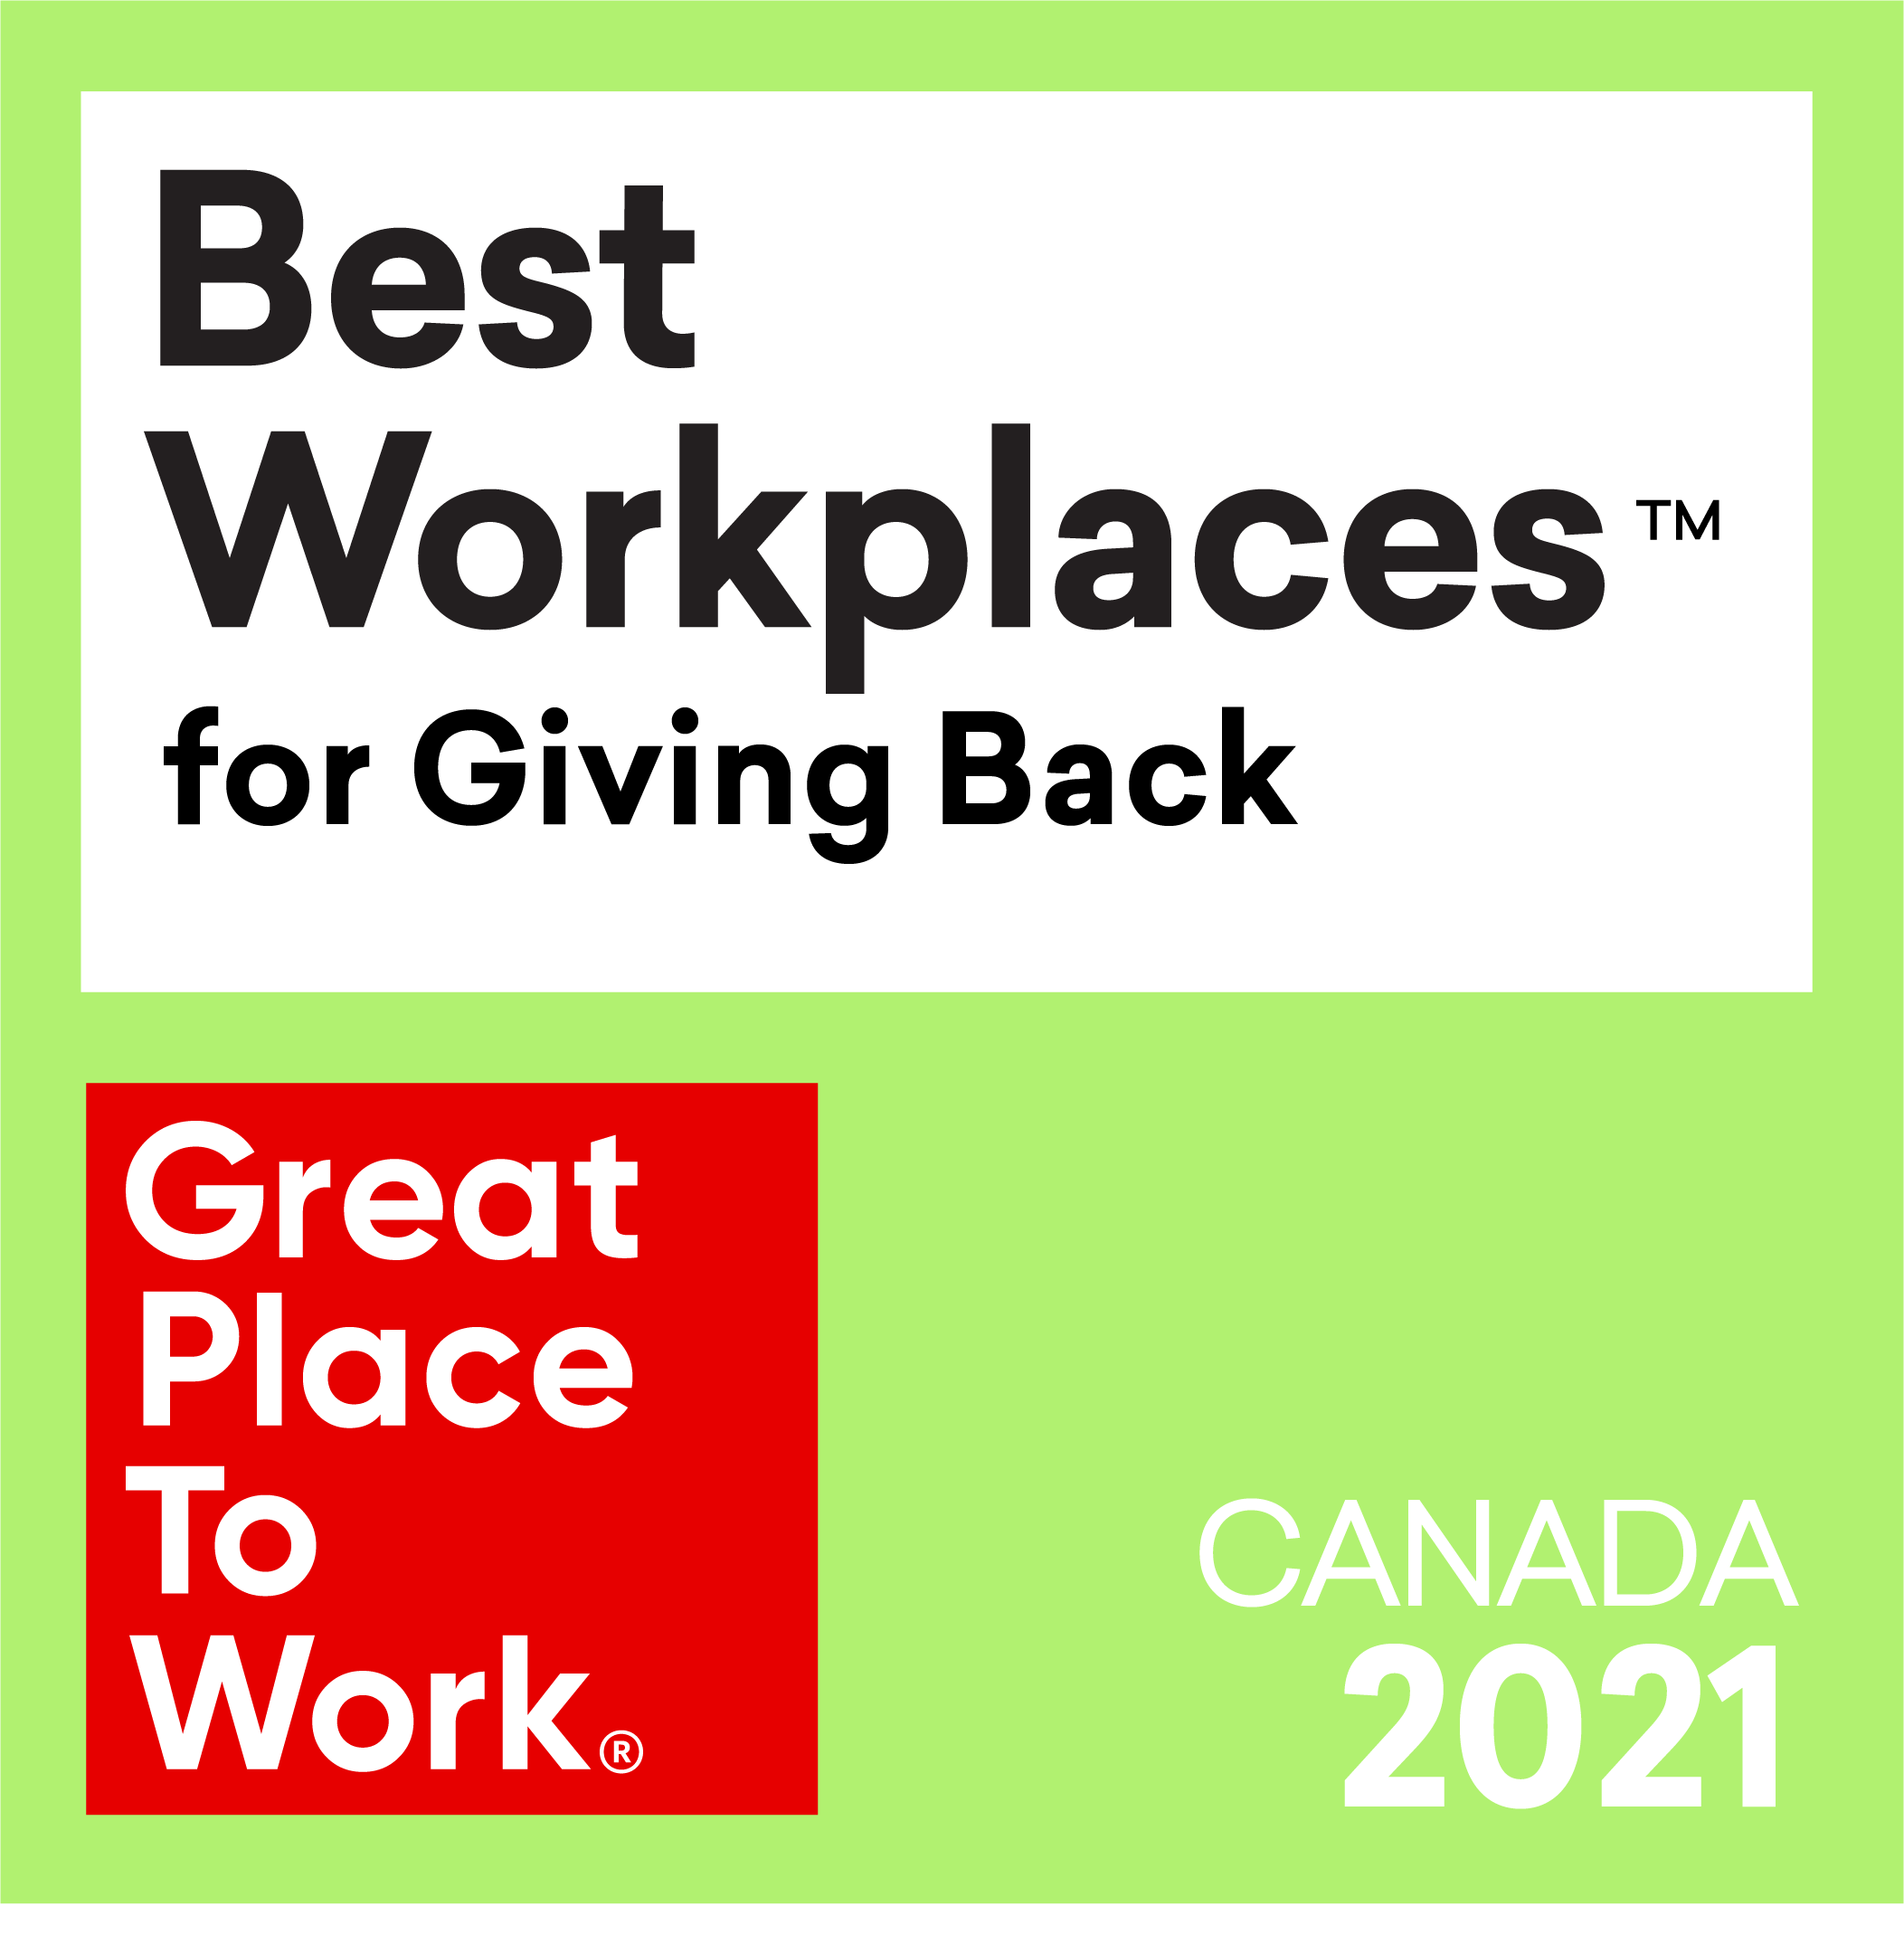 Best Workplaces for Giving Back 2021